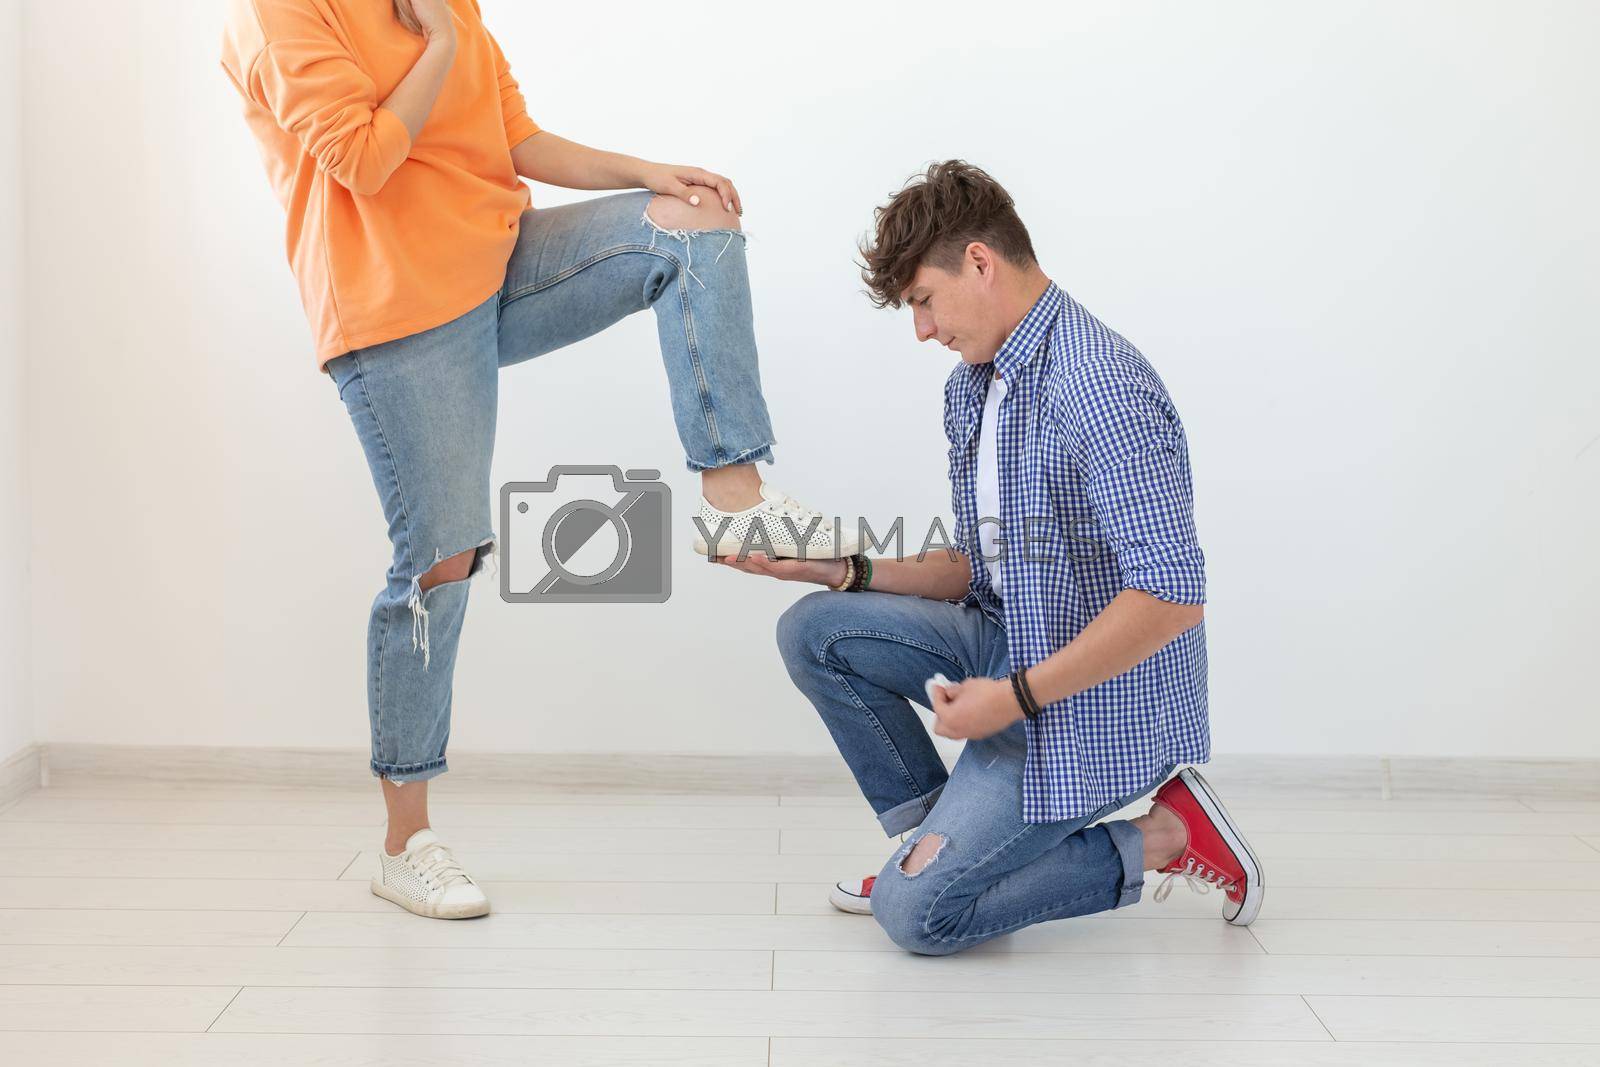 Royalty free image of Young man is kneeling and reverently tying shoelaces to his domineering unidentified woman posing on a white background. Concept of dominant relationships. by Satura86